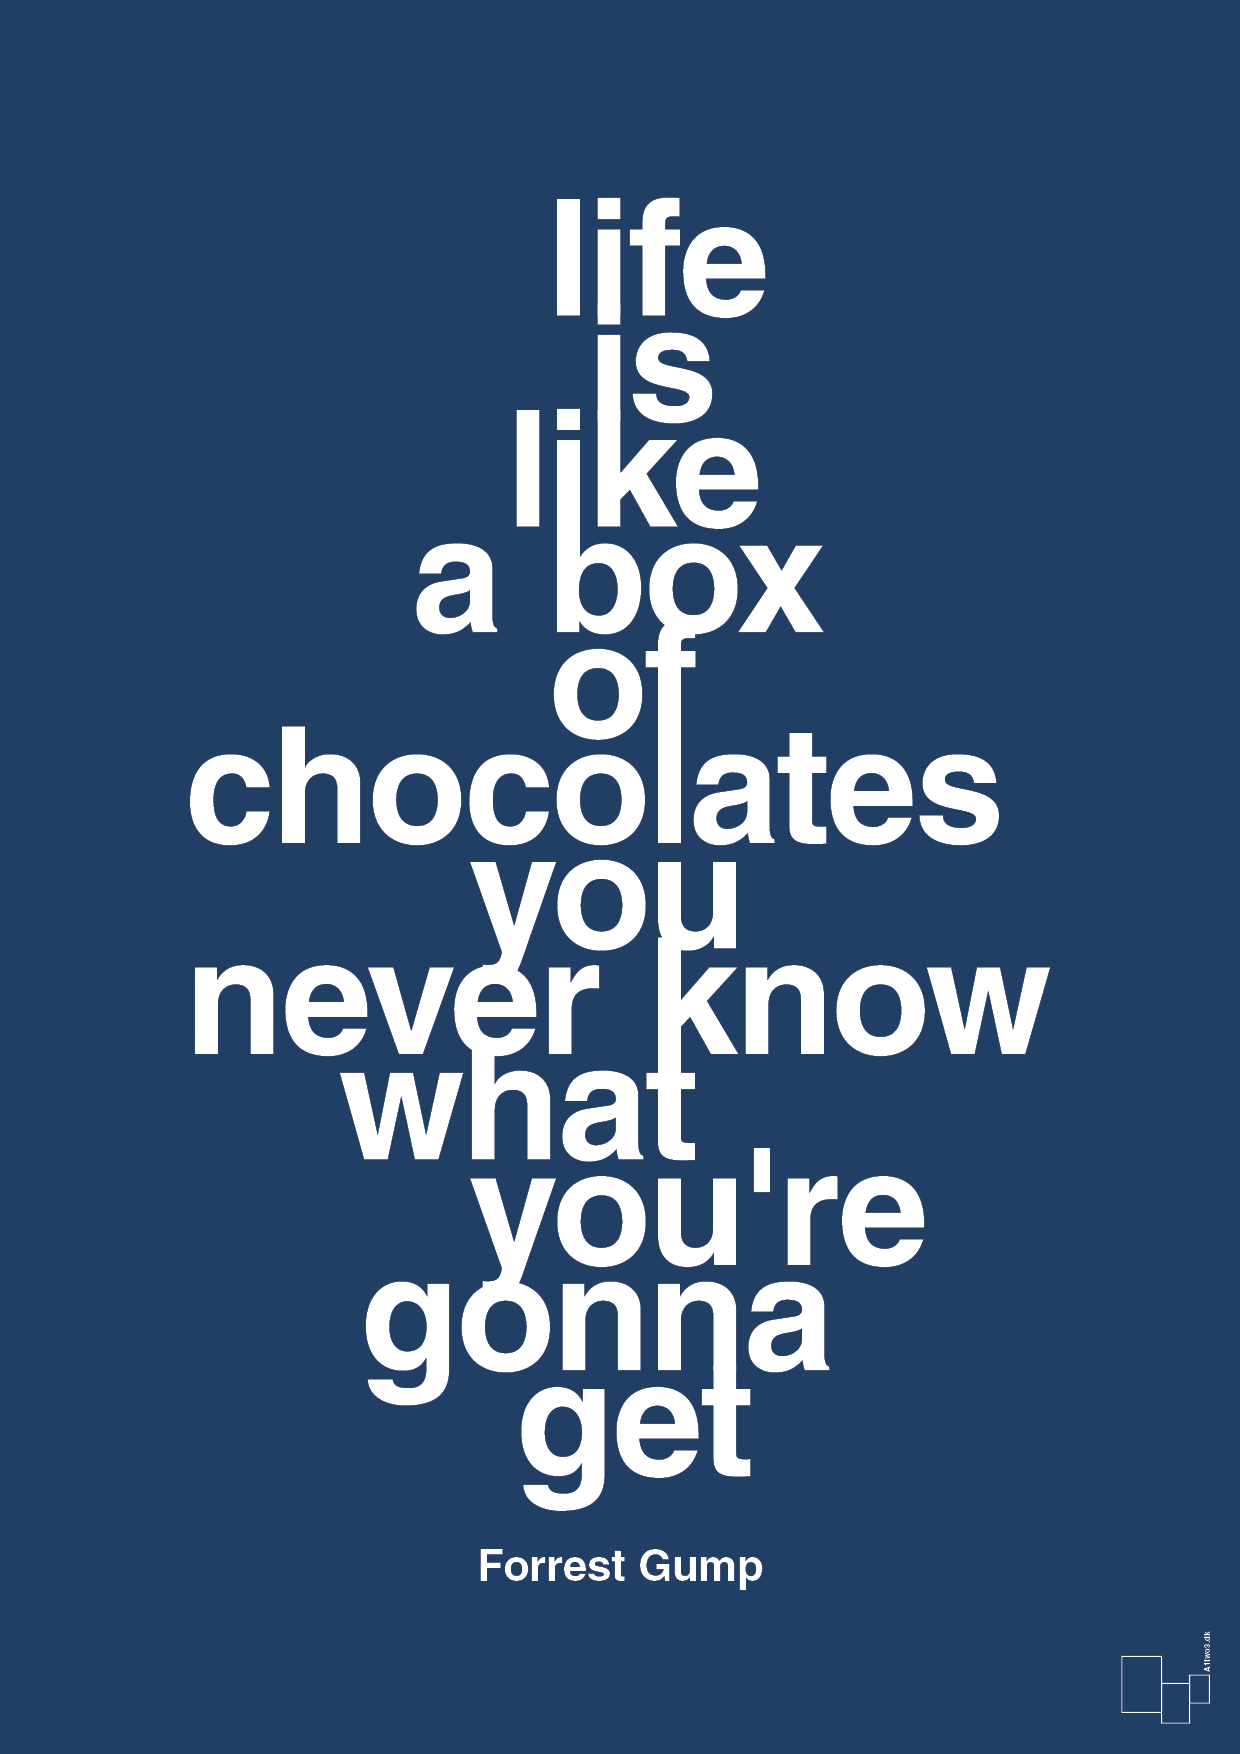 life is like a box of chocolates you never know what you're gonna get - Plakat med Citater i Lapis Blue